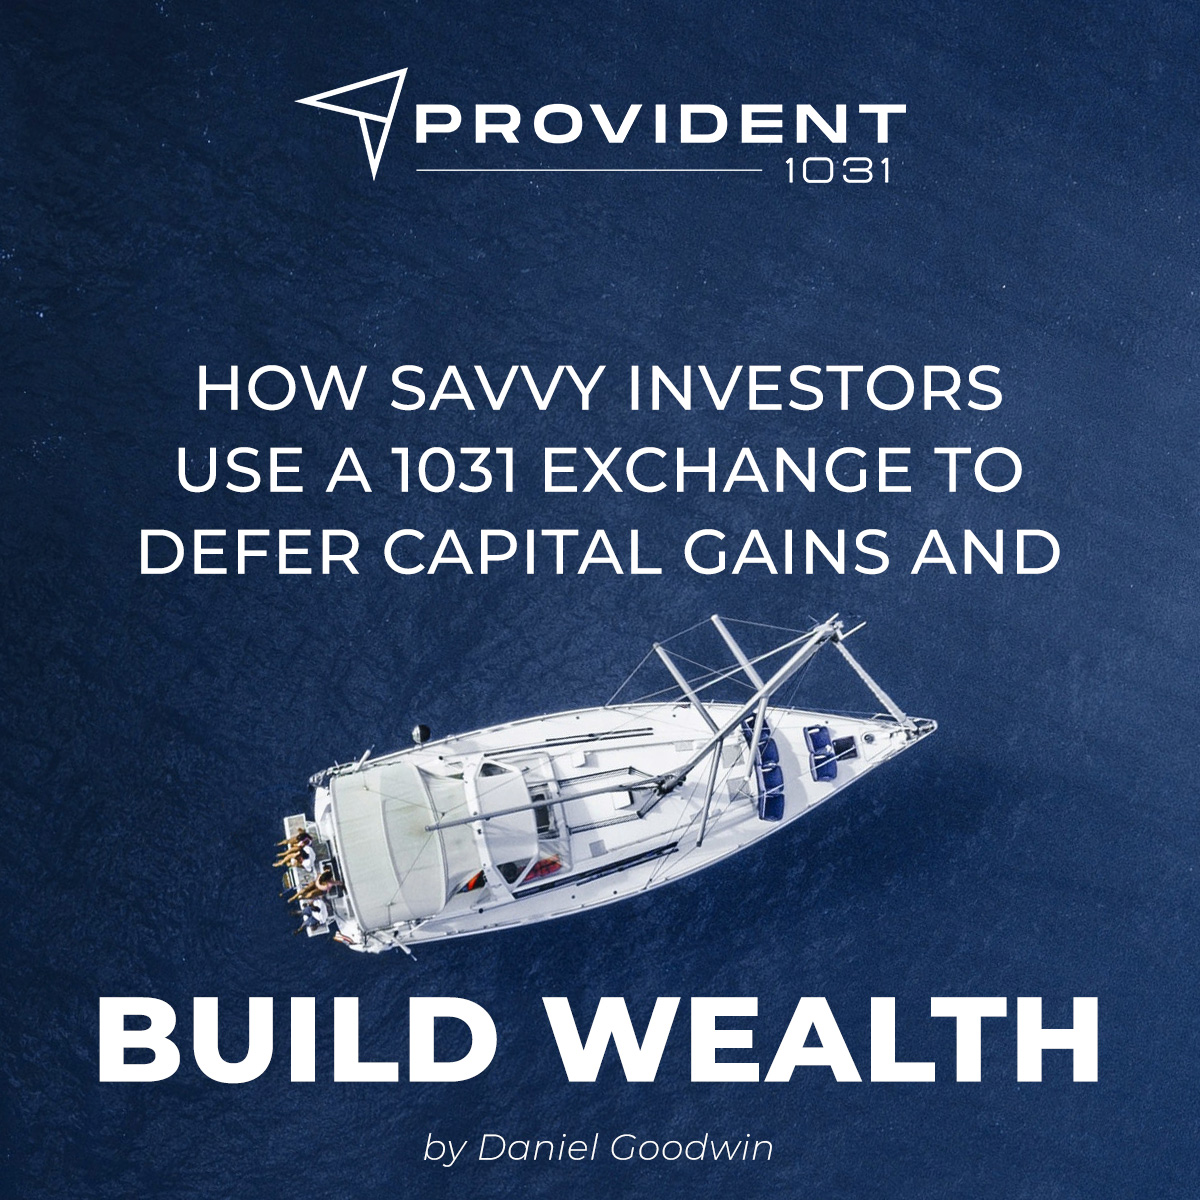 How Savvy Investors Use A 1031 Exchange To Defer Capital Gains and Build Wealth